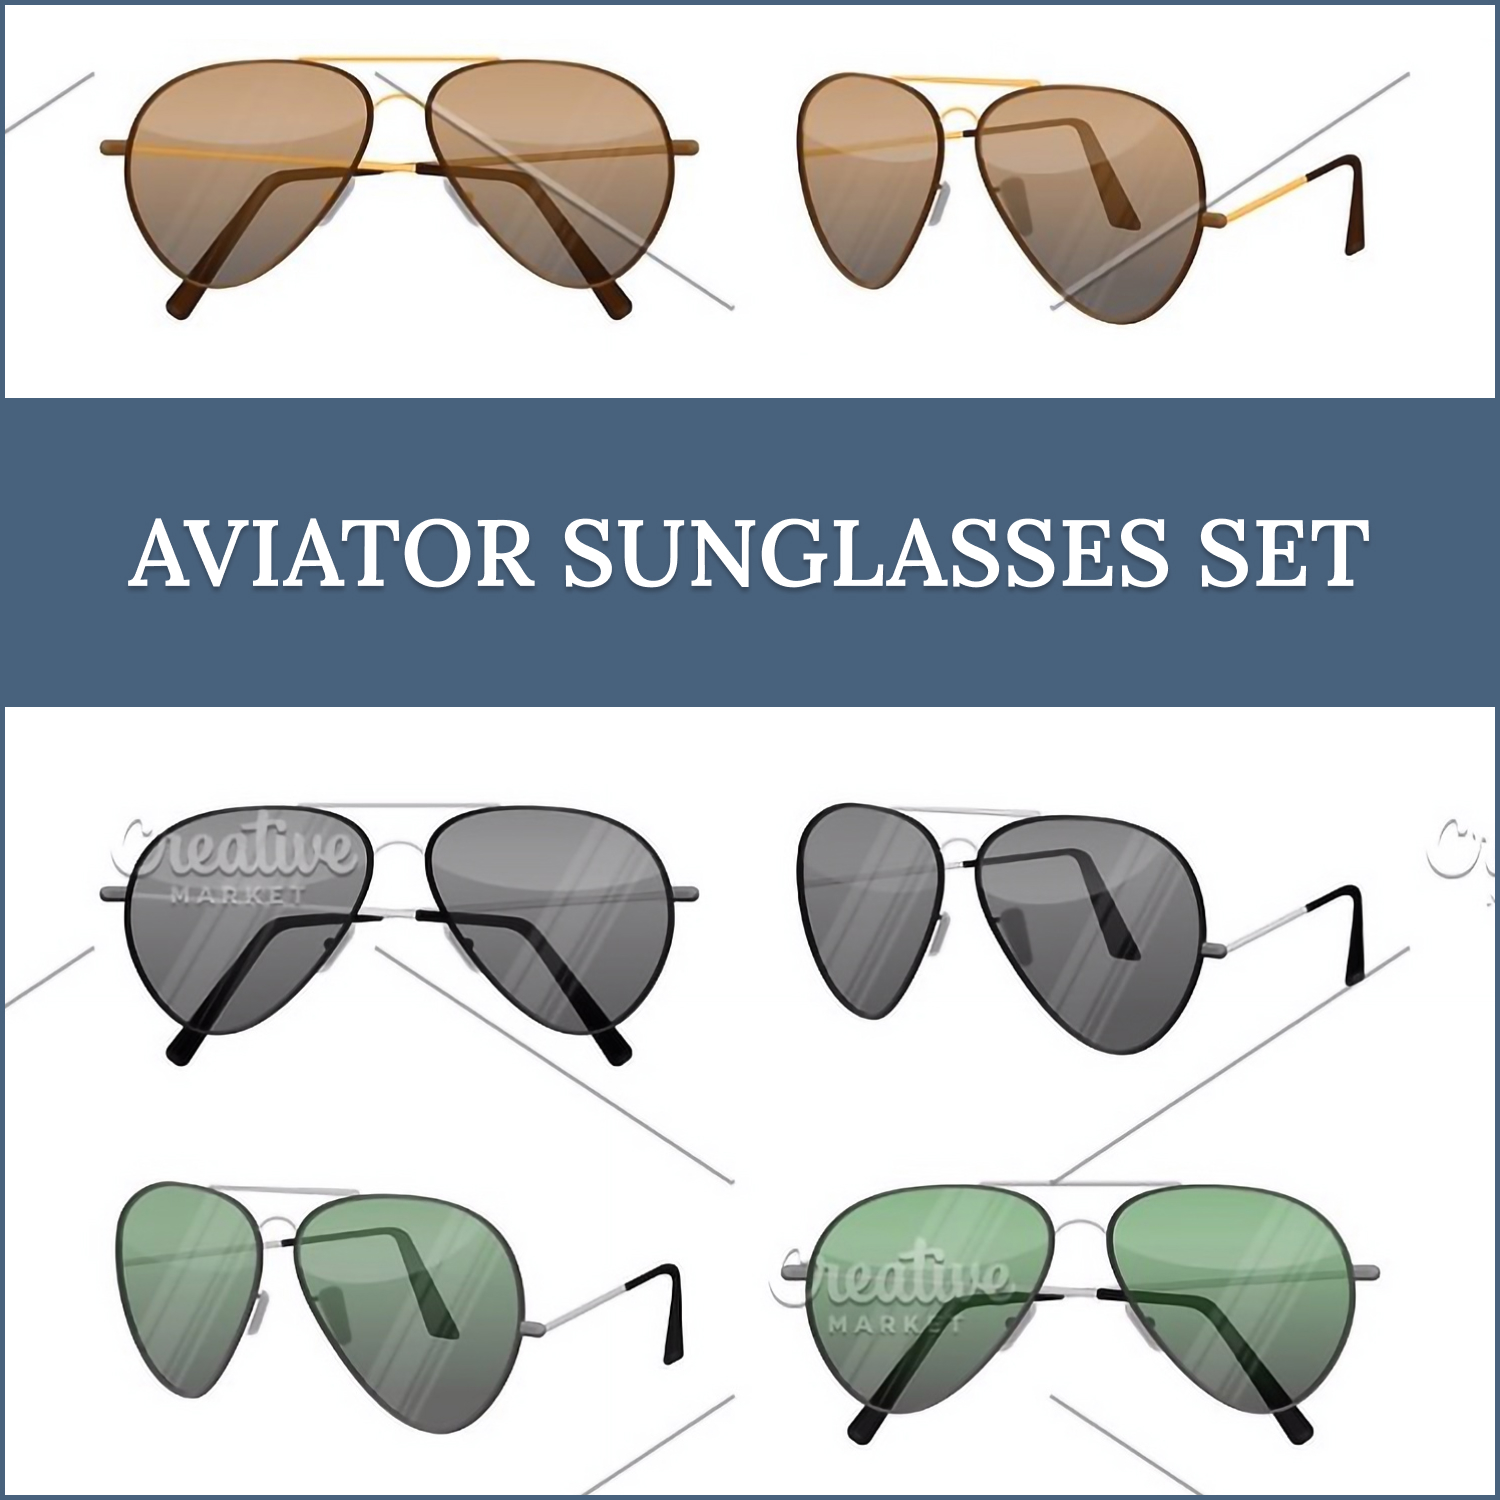 Images preview aviator sunglasses isolated on white. dark brown reflective lense.